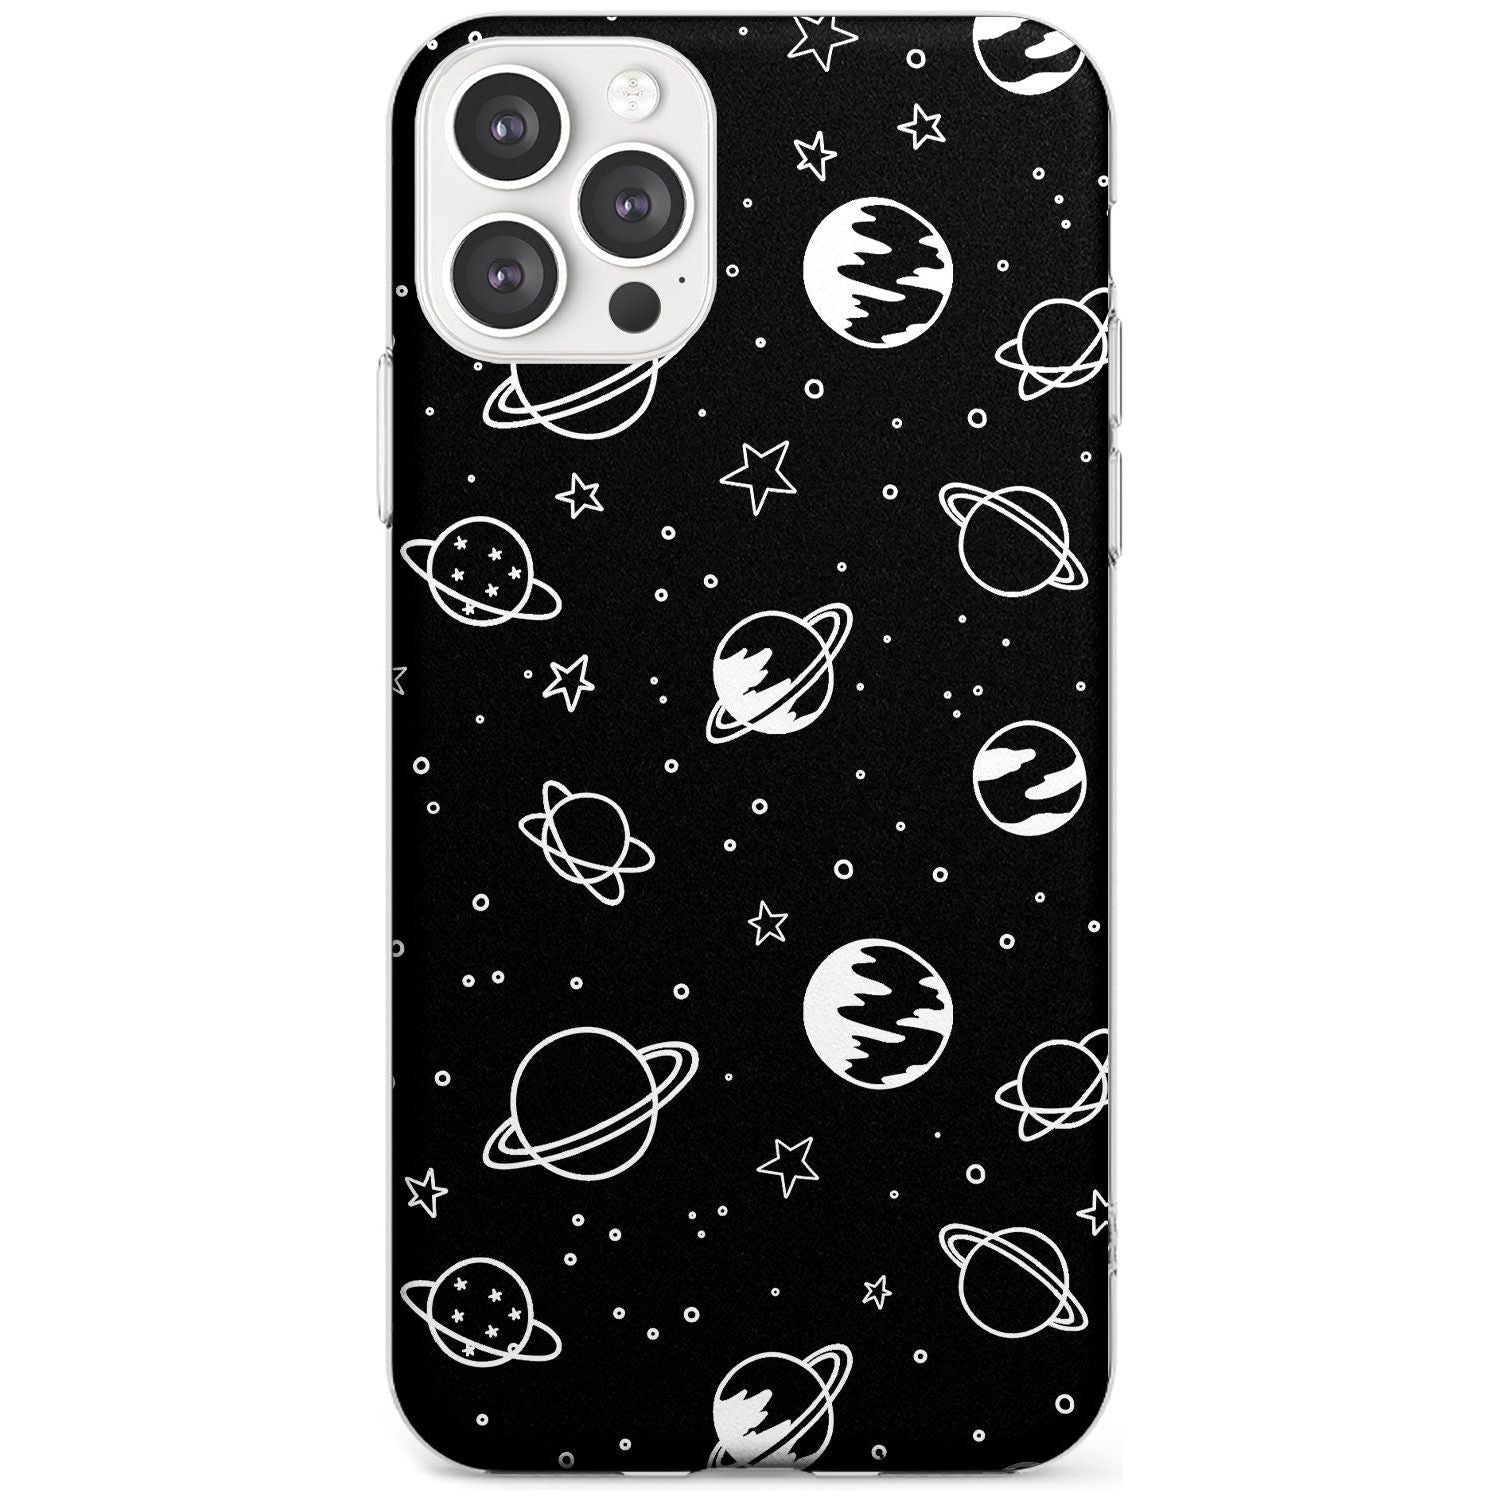 Outer Space Outlines: White on Black Black Impact Phone Case for iPhone 11 Pro Max